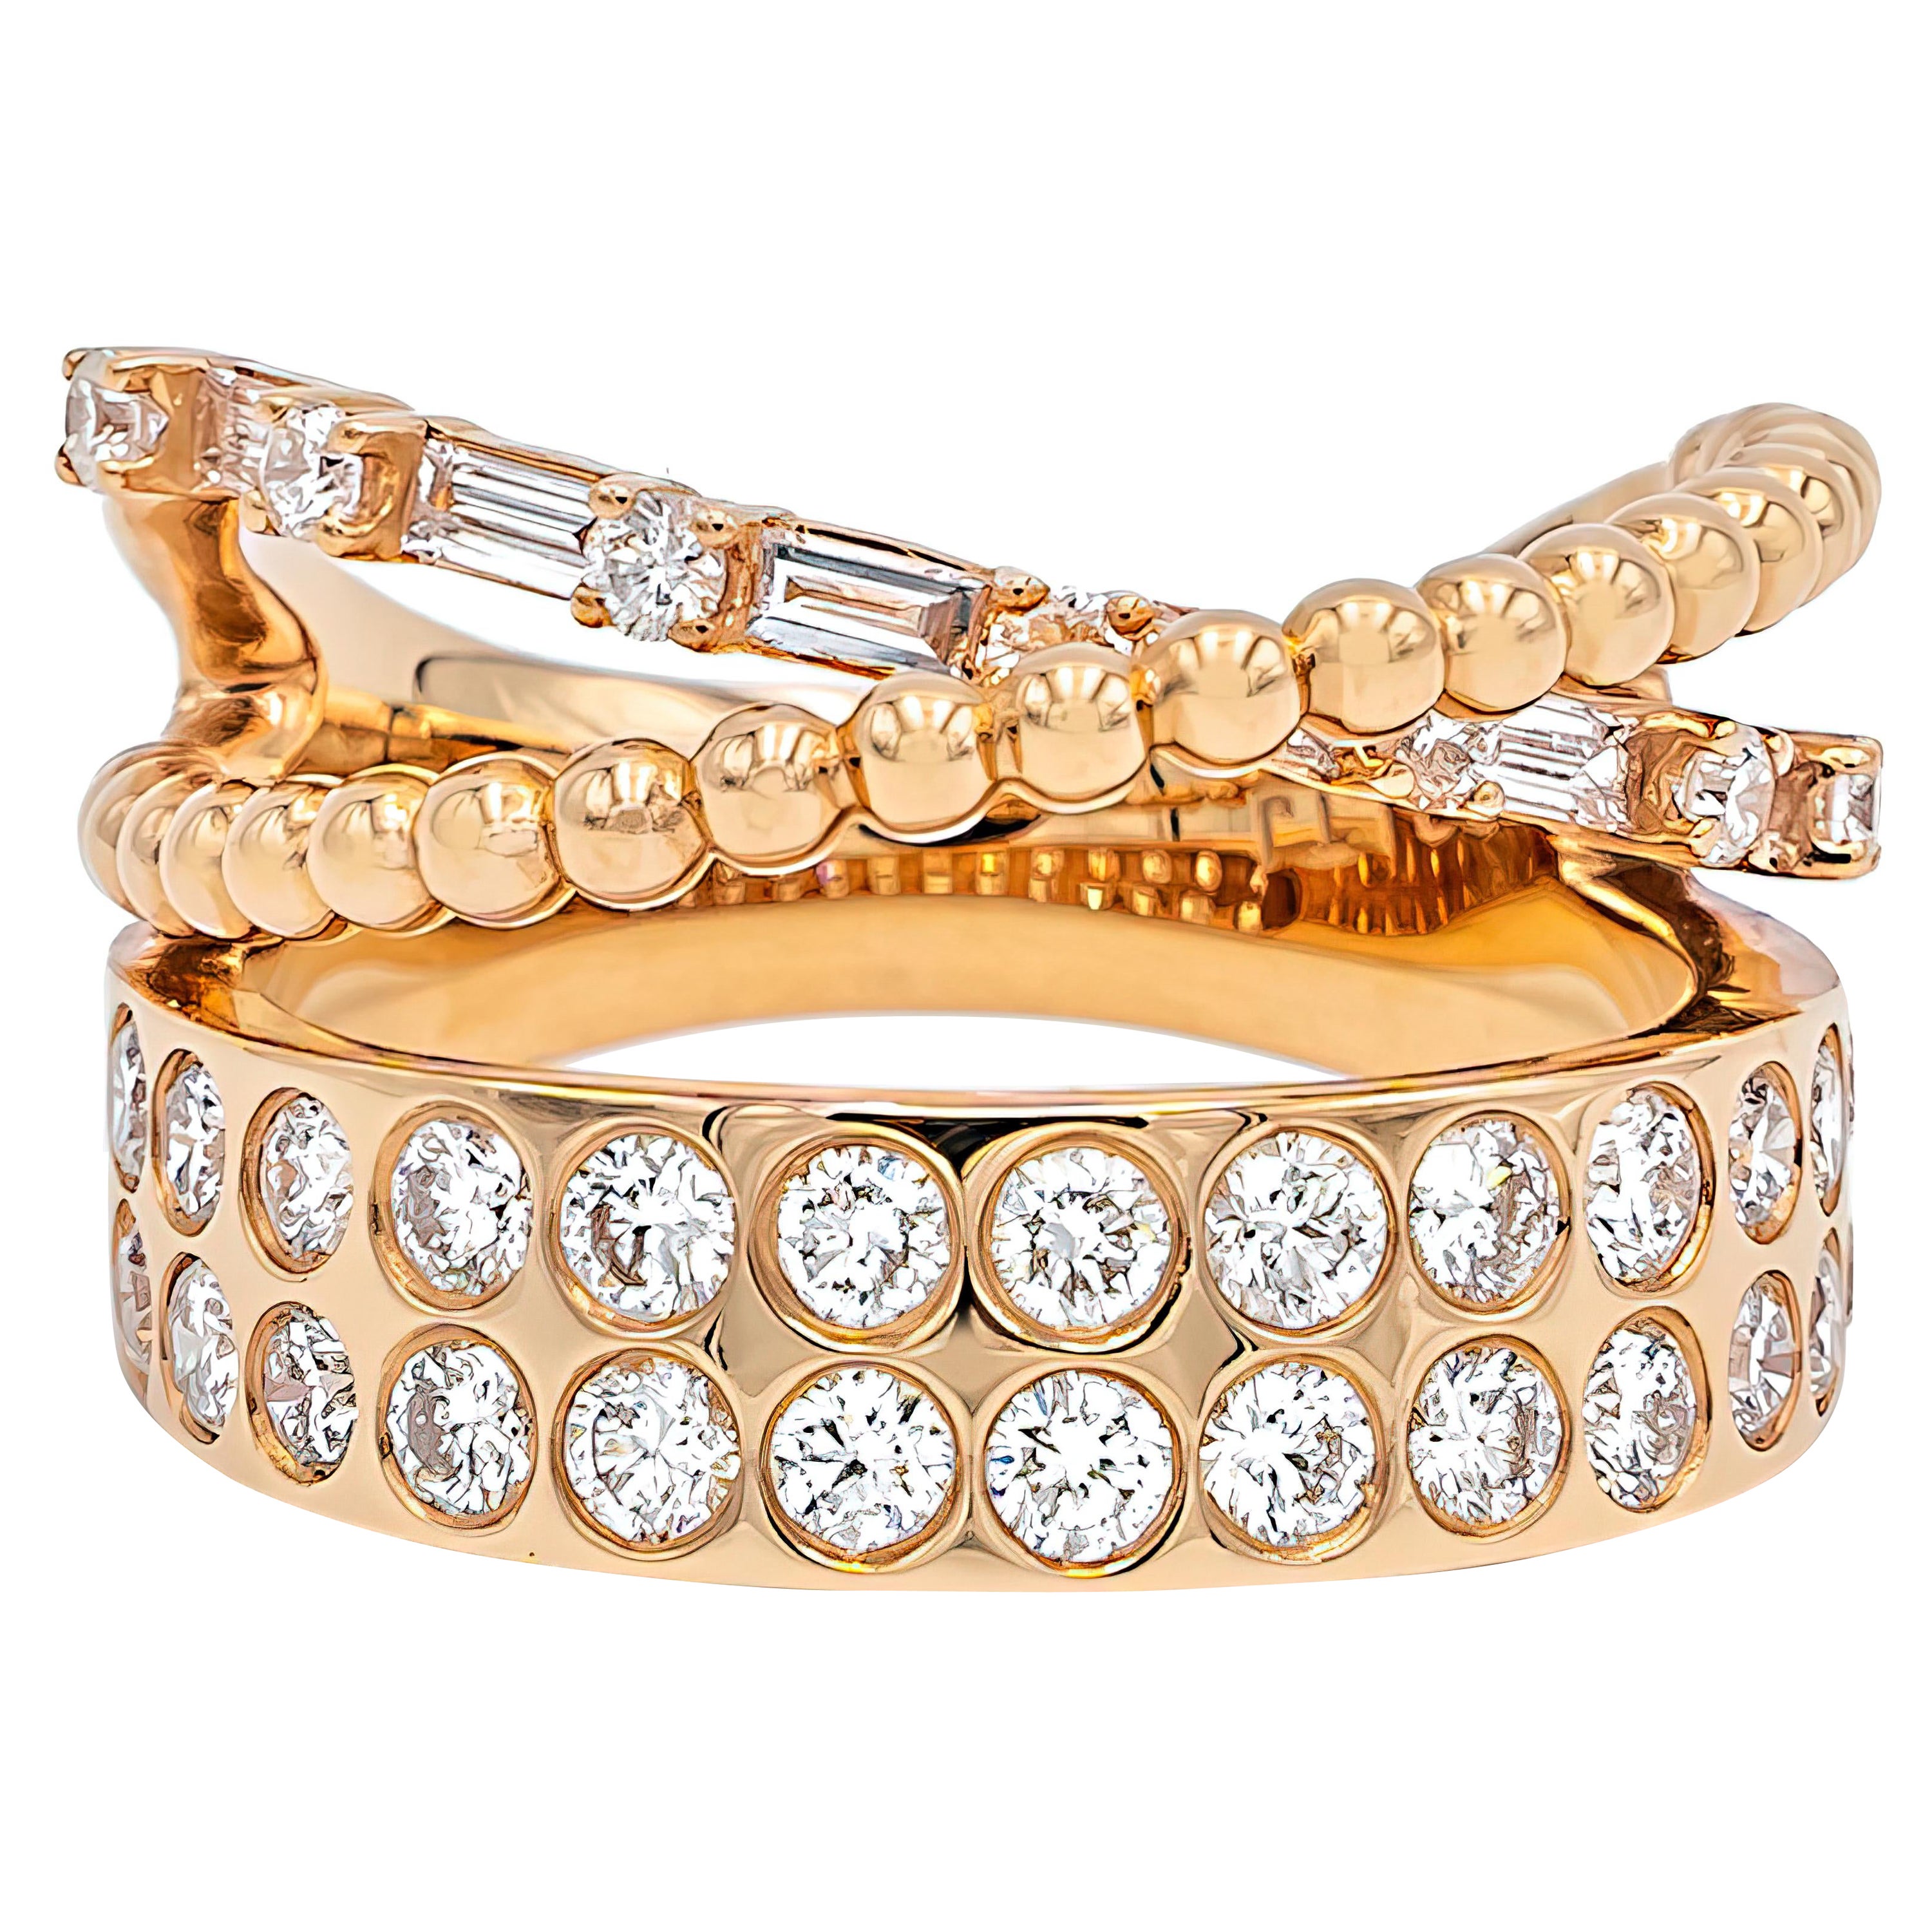 Mix and Matched Round and Tapered Diamonds in Criss Cross Bands, 18k Gold Ring For Sale